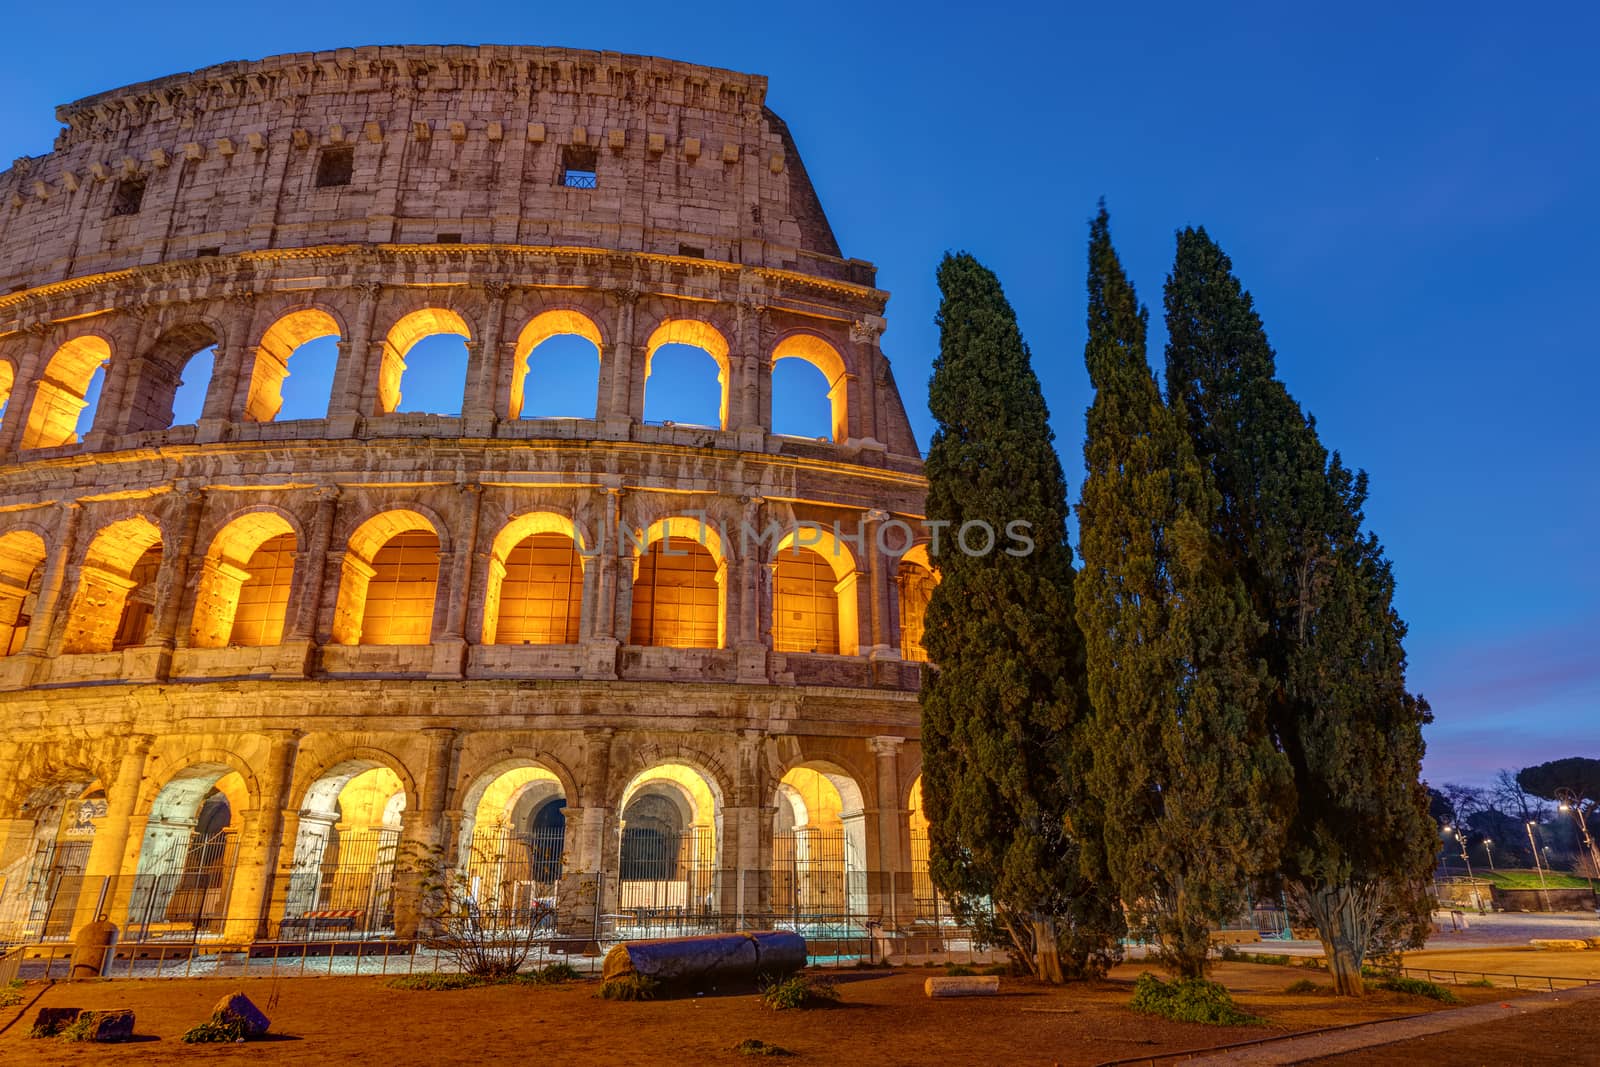 The illuminated Colosseum in Rome at twilight